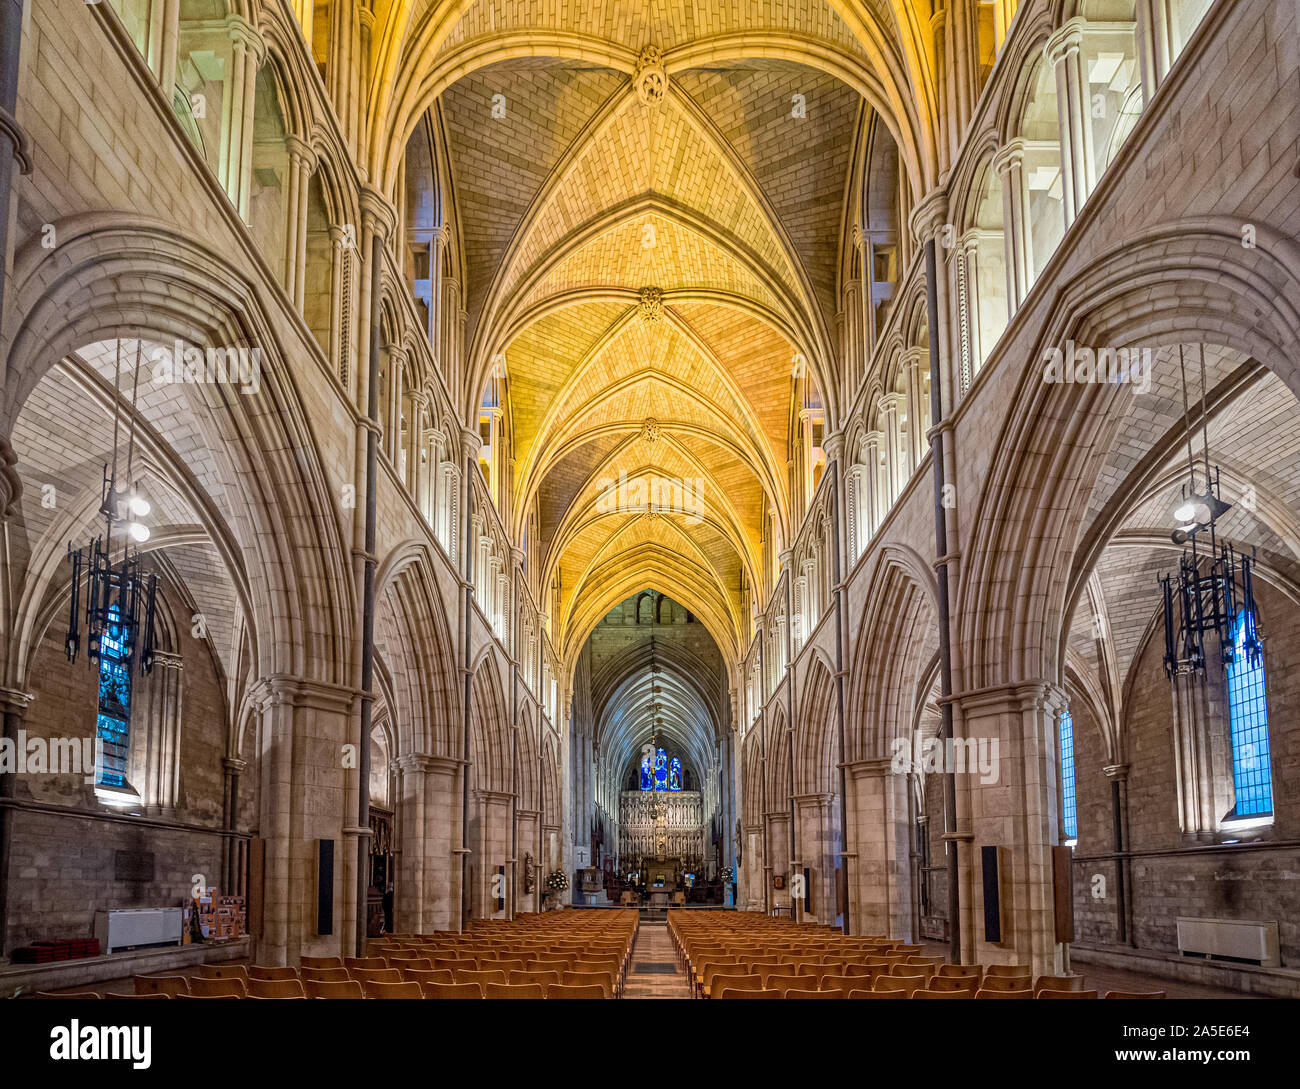 Interior of Southwark Cathedral (The Cathedral and Collegiate Church of St Saviour and St Mary Overie), Southwark, London, UK. Stock Photo